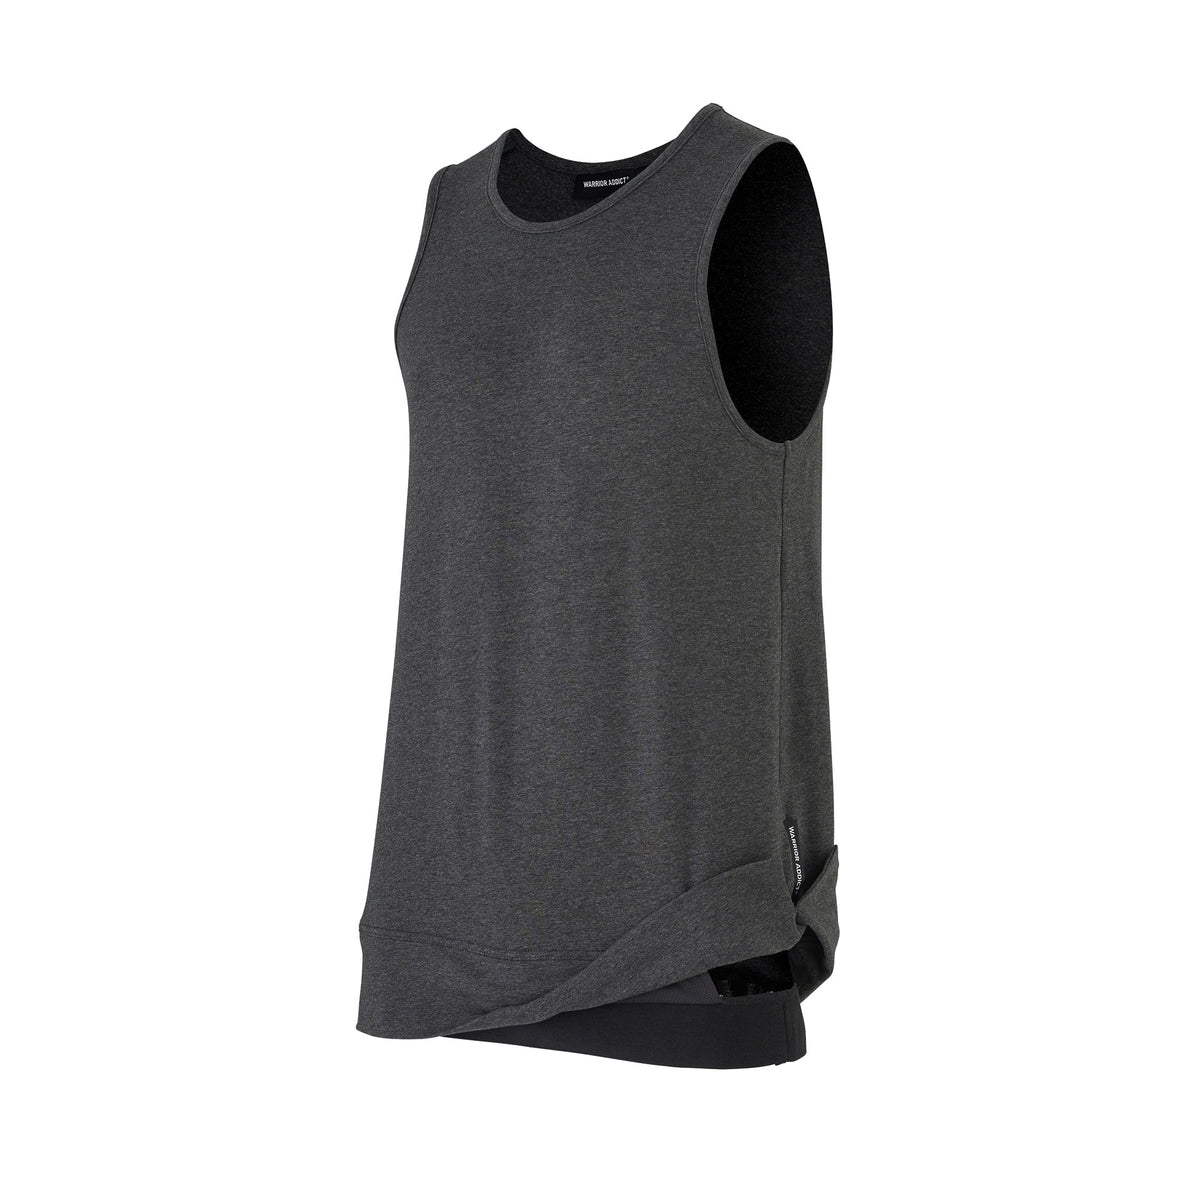 grey mens yoga top that does not ride up by warrior addict 